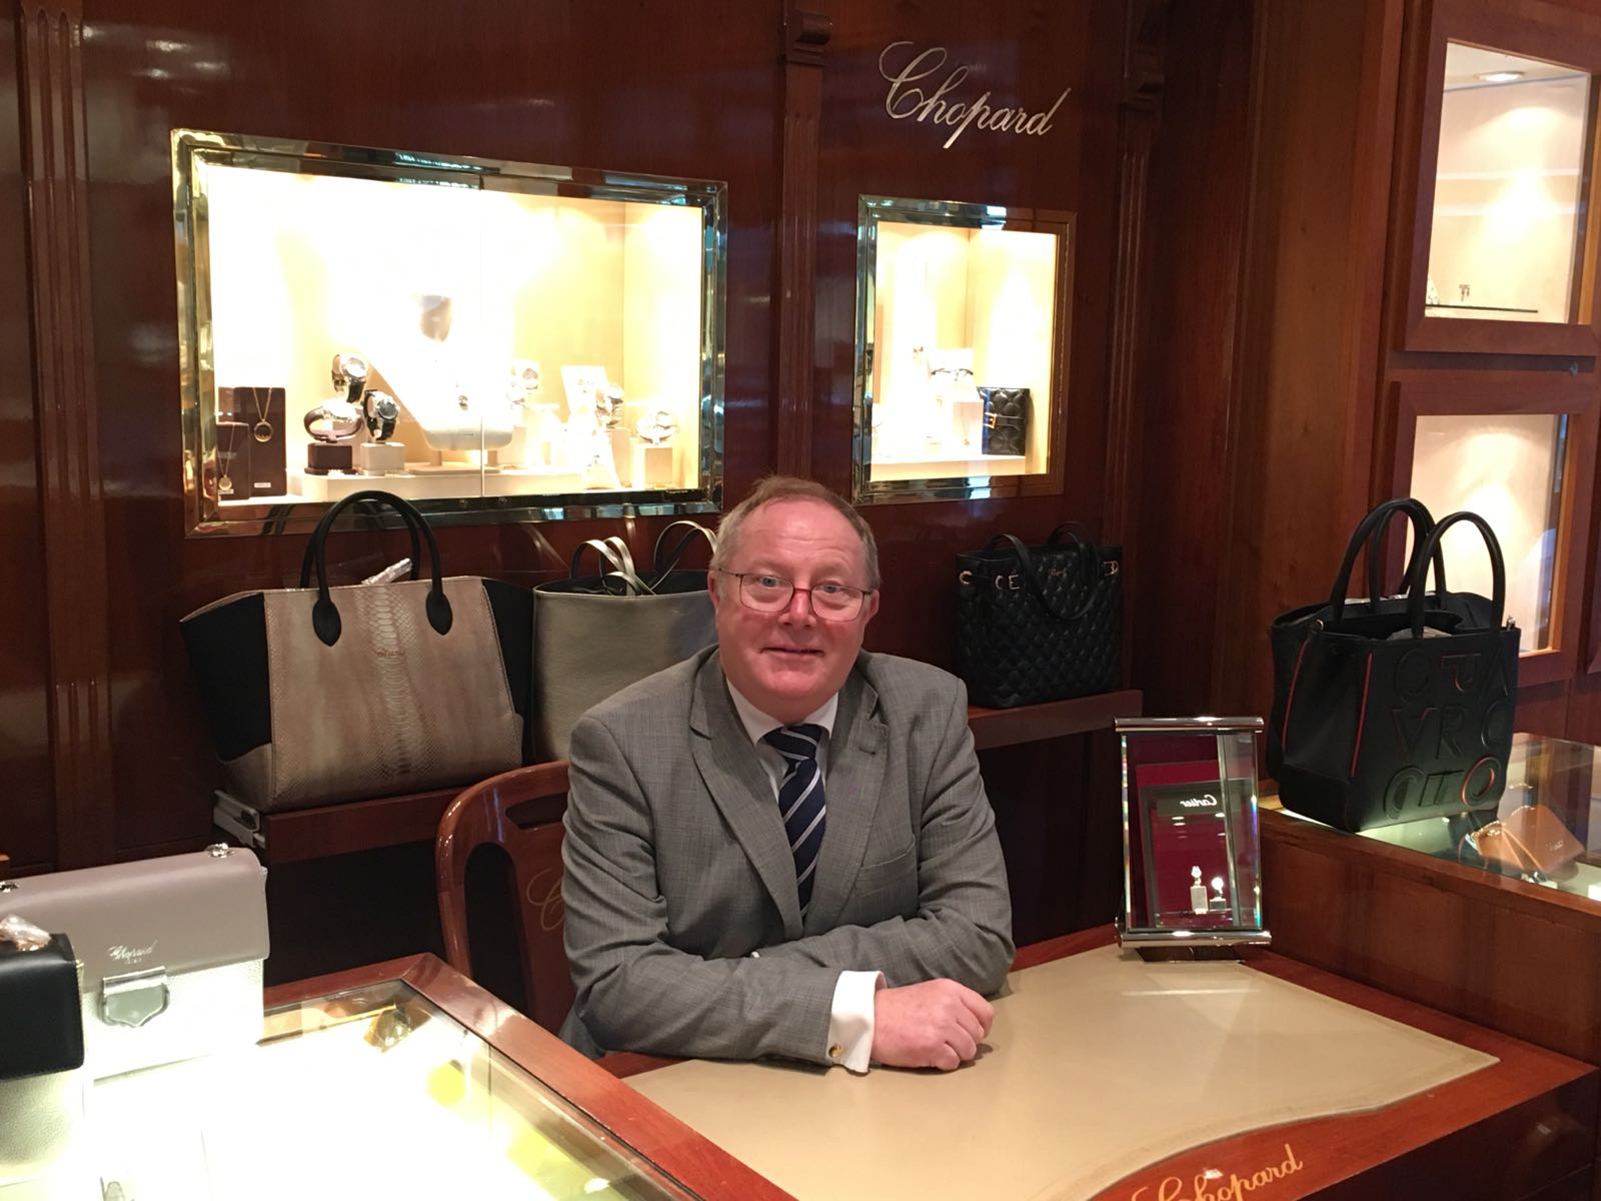 Peter harrington is a familiar face to watch collectors in wilmslow.